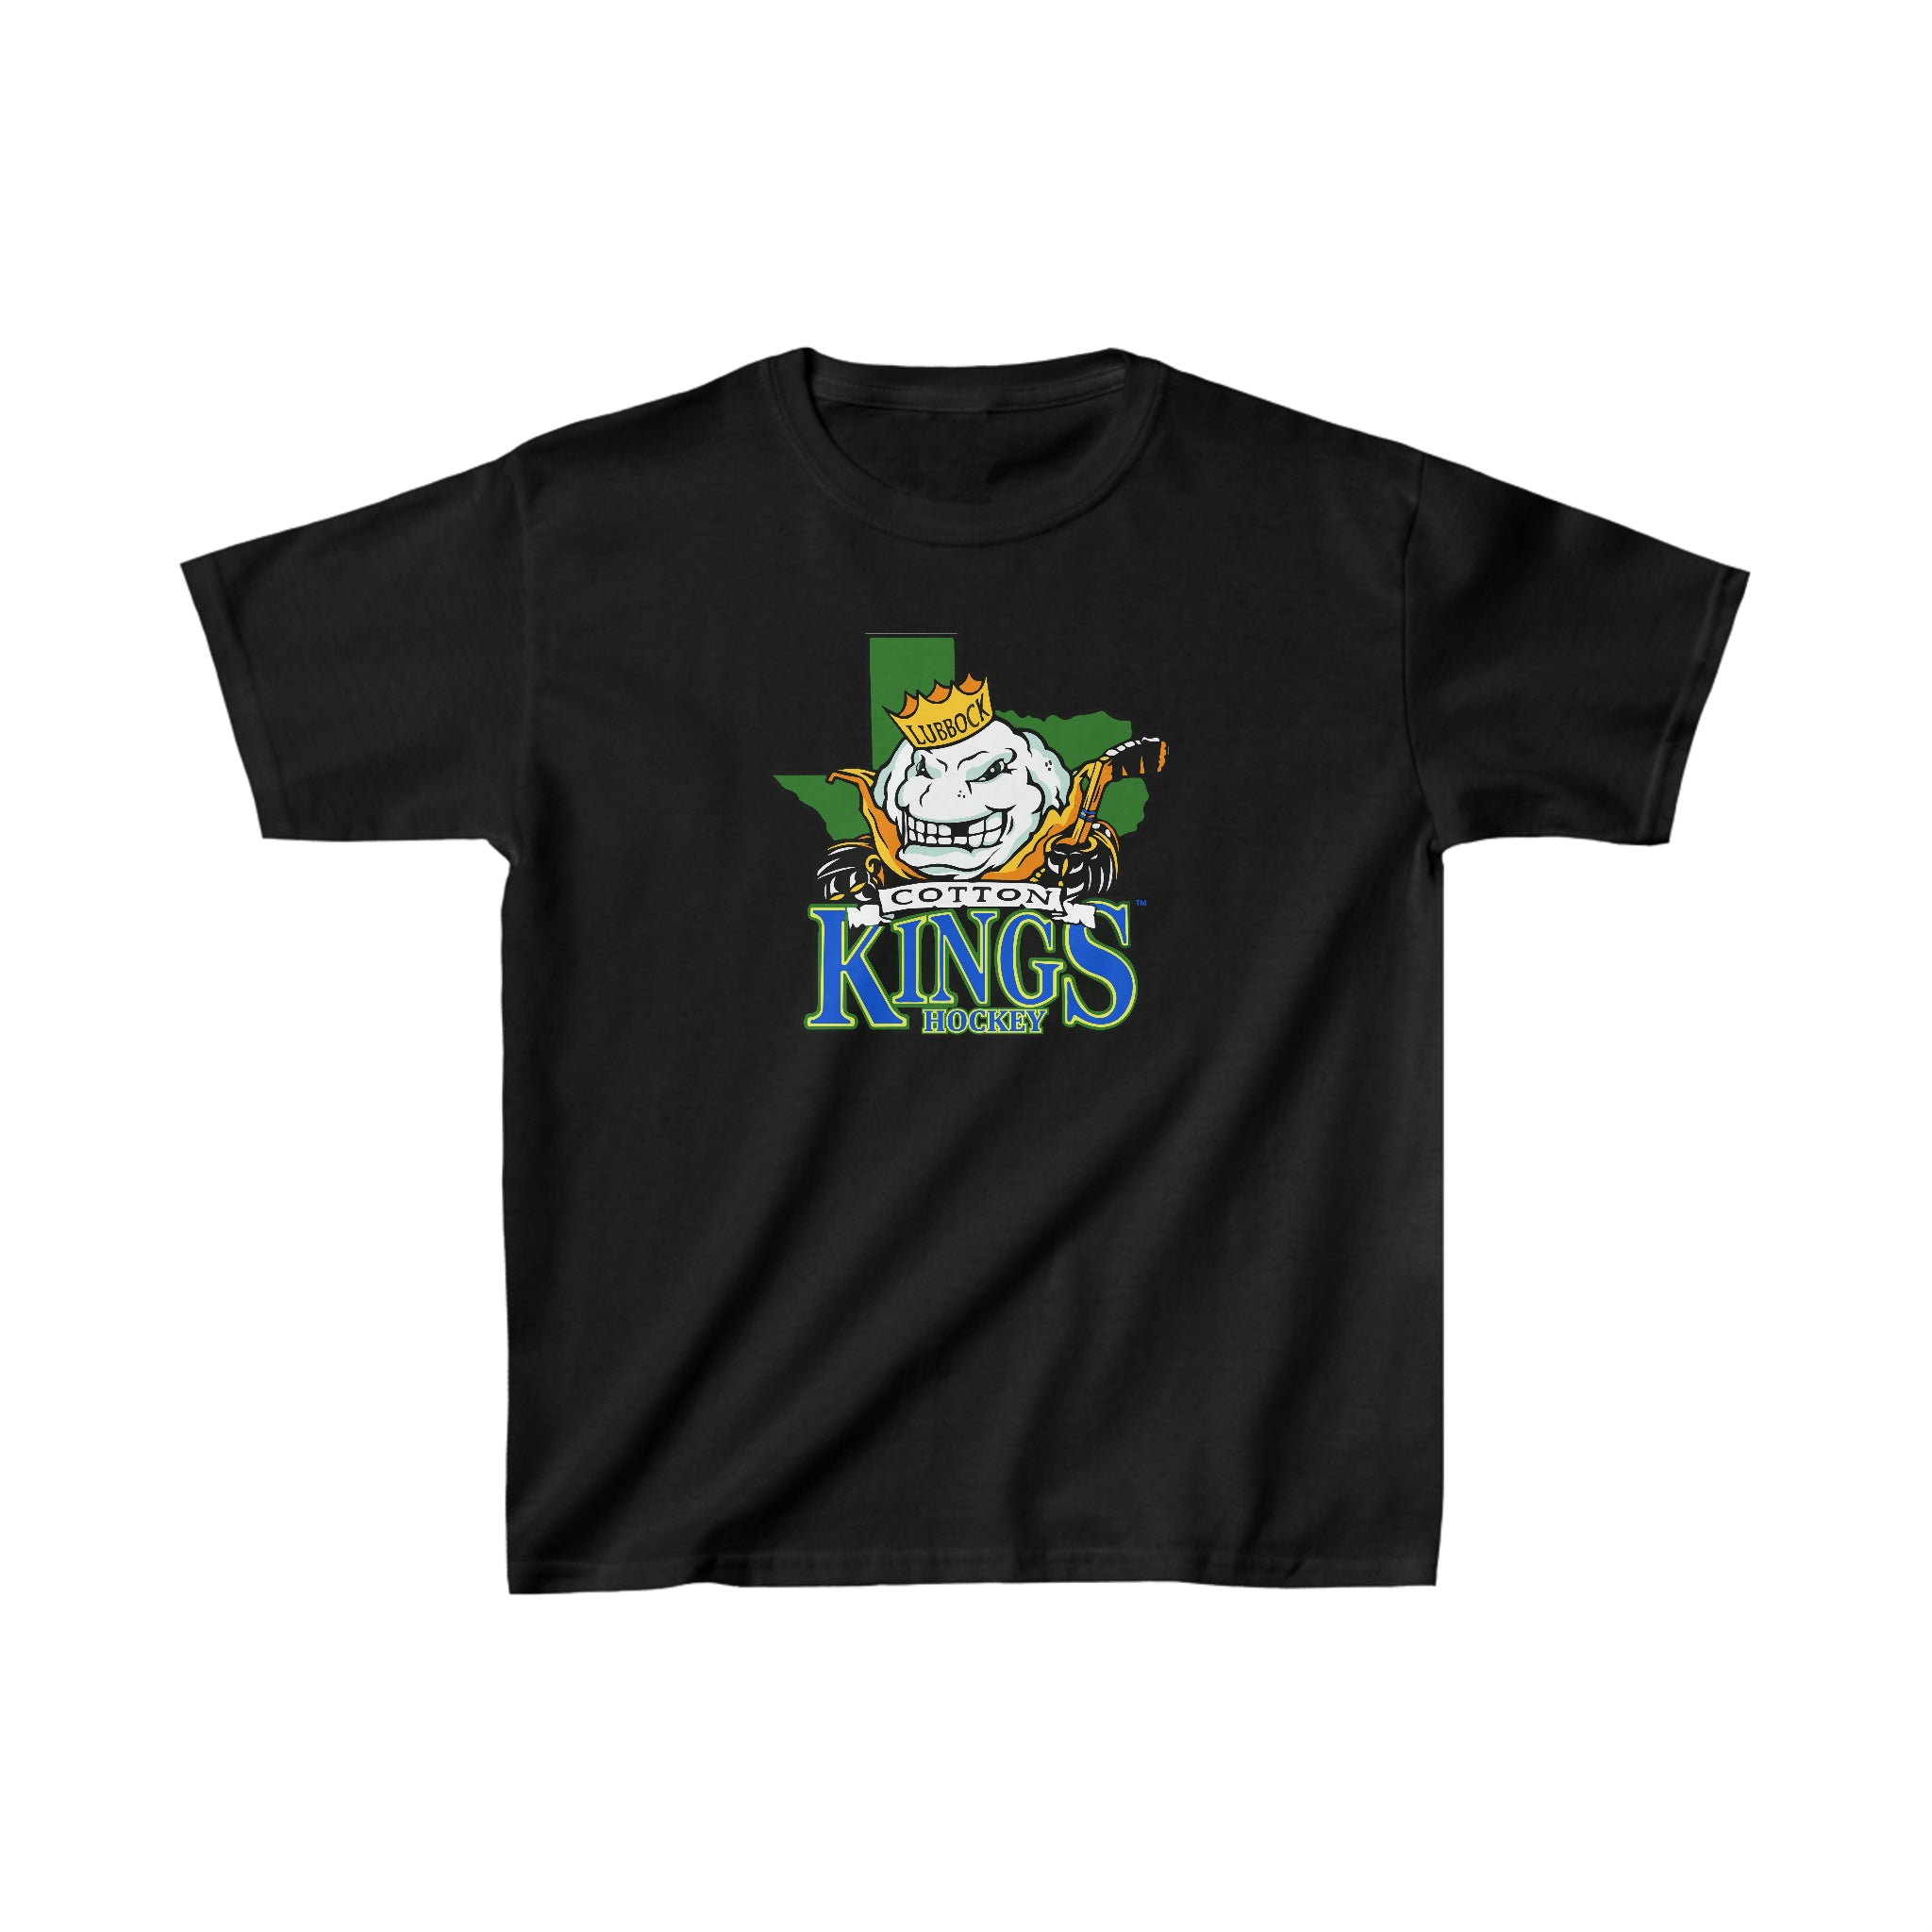 Lubbock Cotton Kings T-Shirt (Youth)